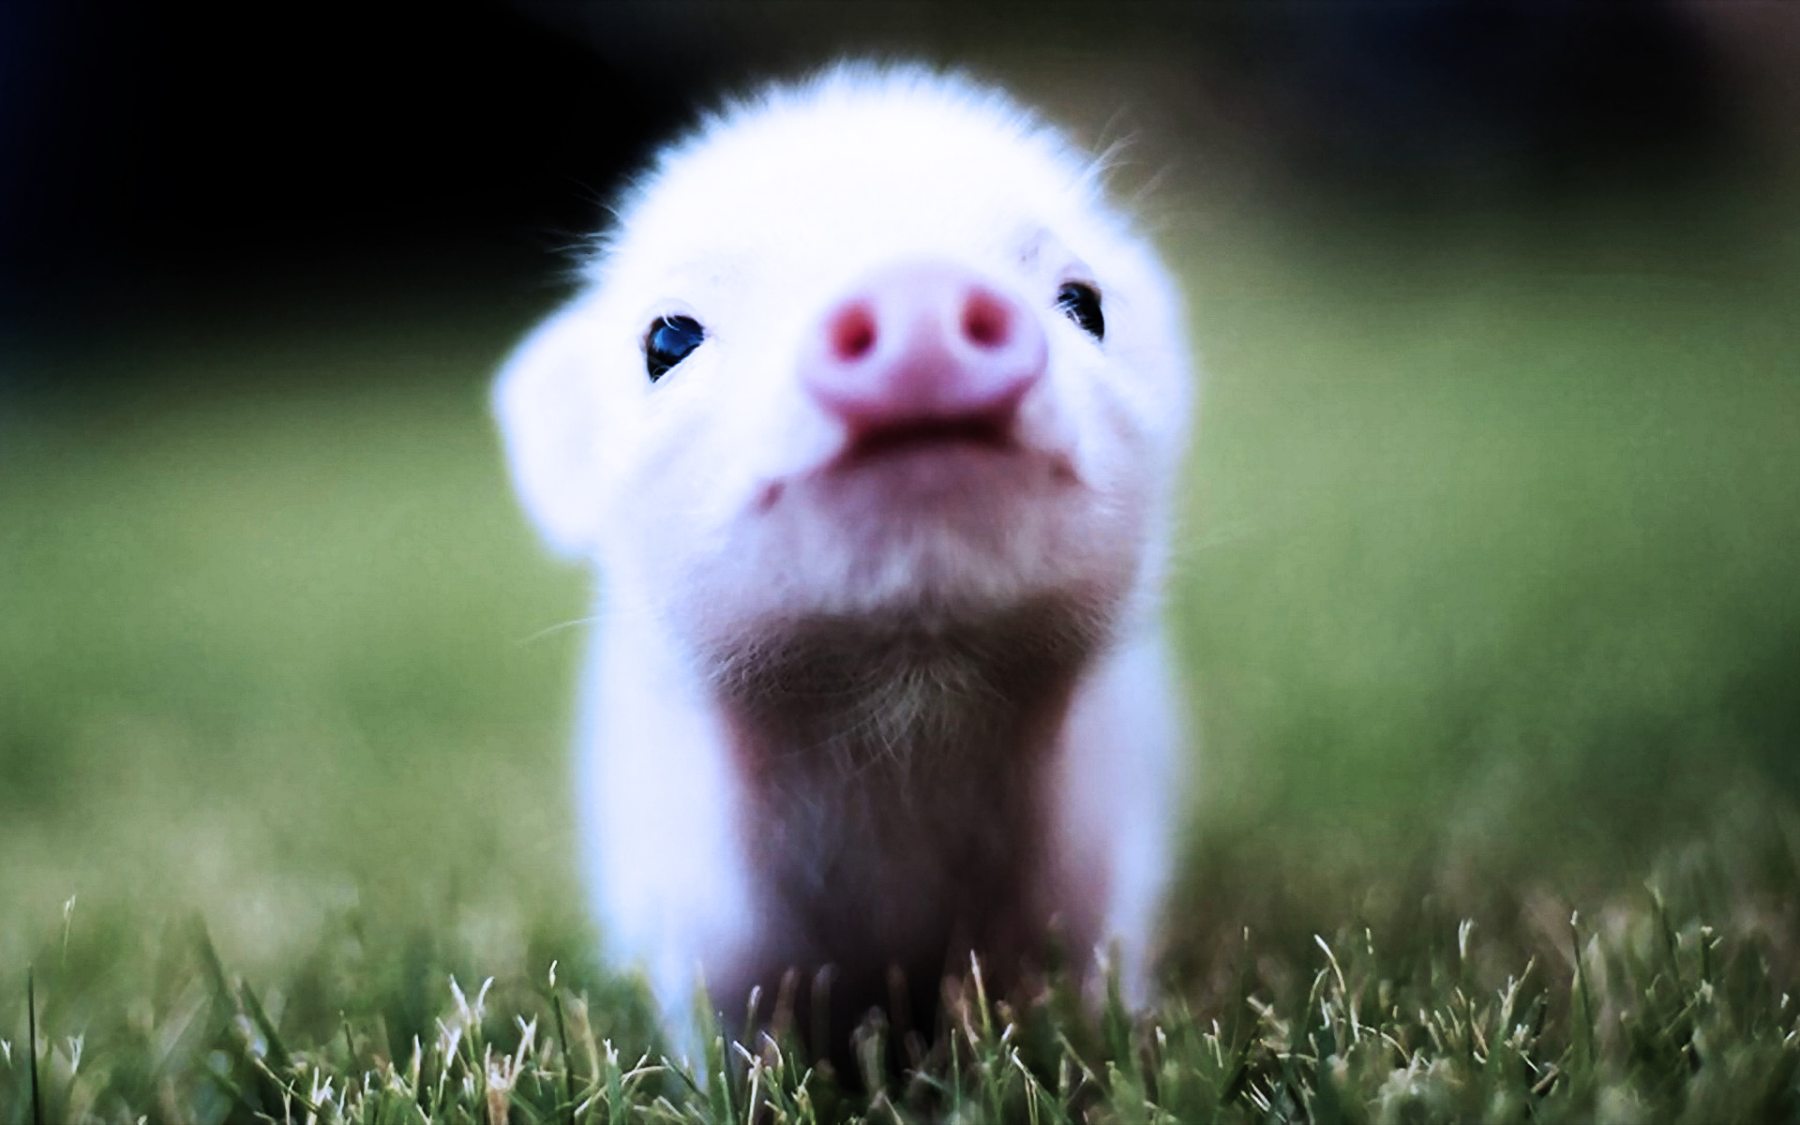 Baby Pig Wallpaper 20042 Hd Wallpapers in Animals   Imagescicom